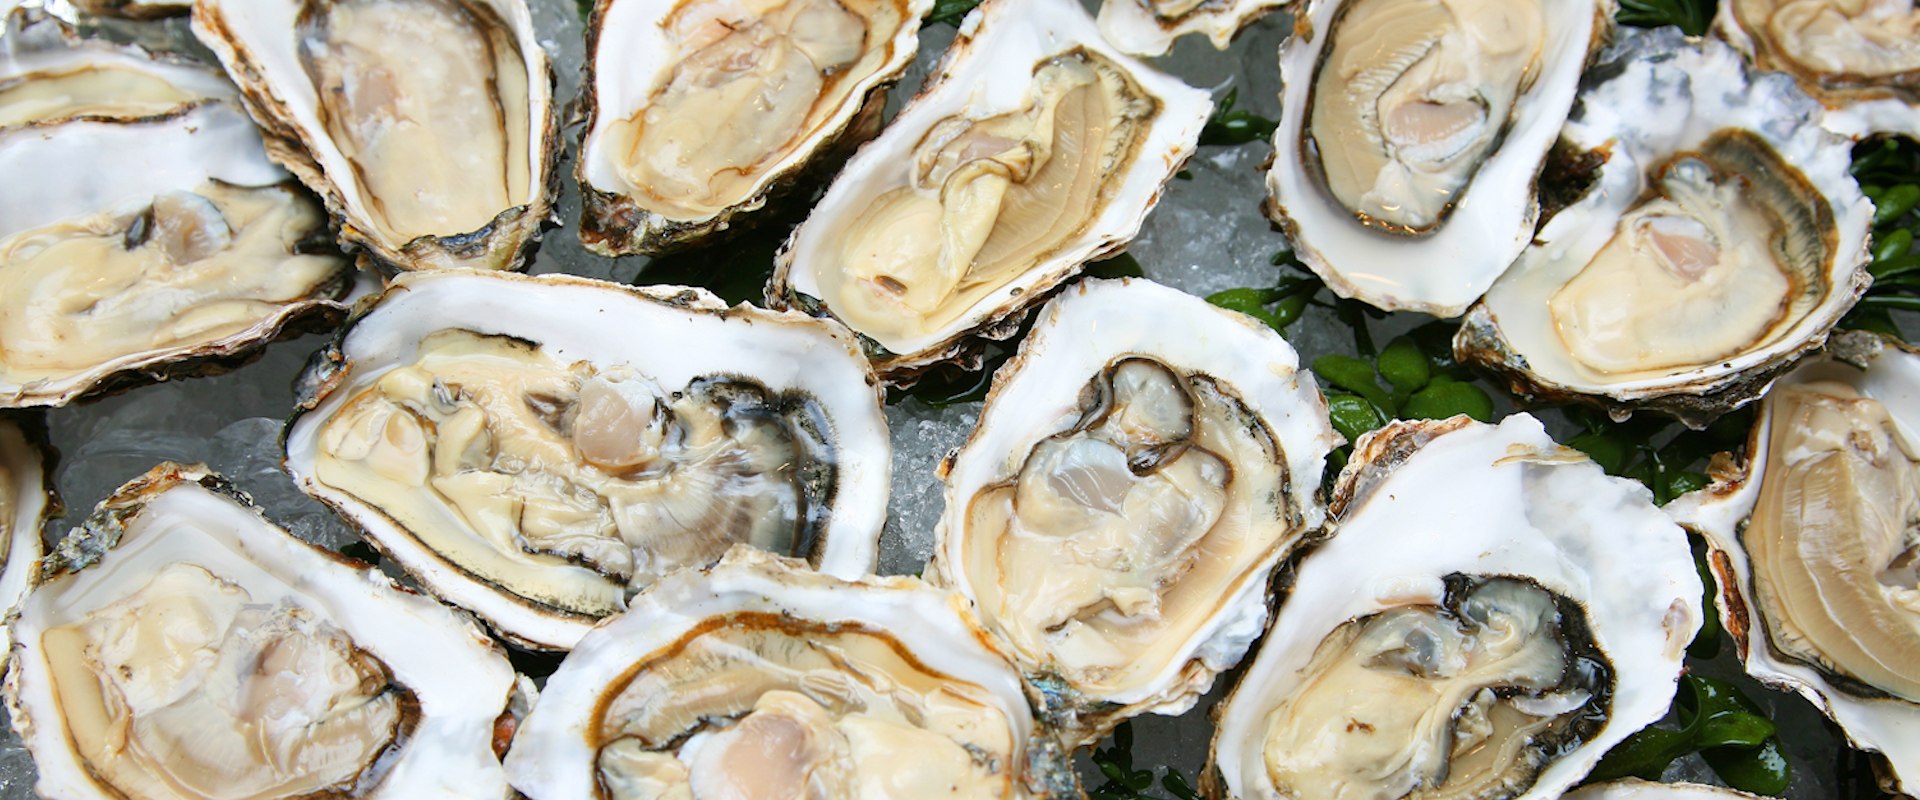 Health Benefits of Eating Oysters from Fairhope, Alabama